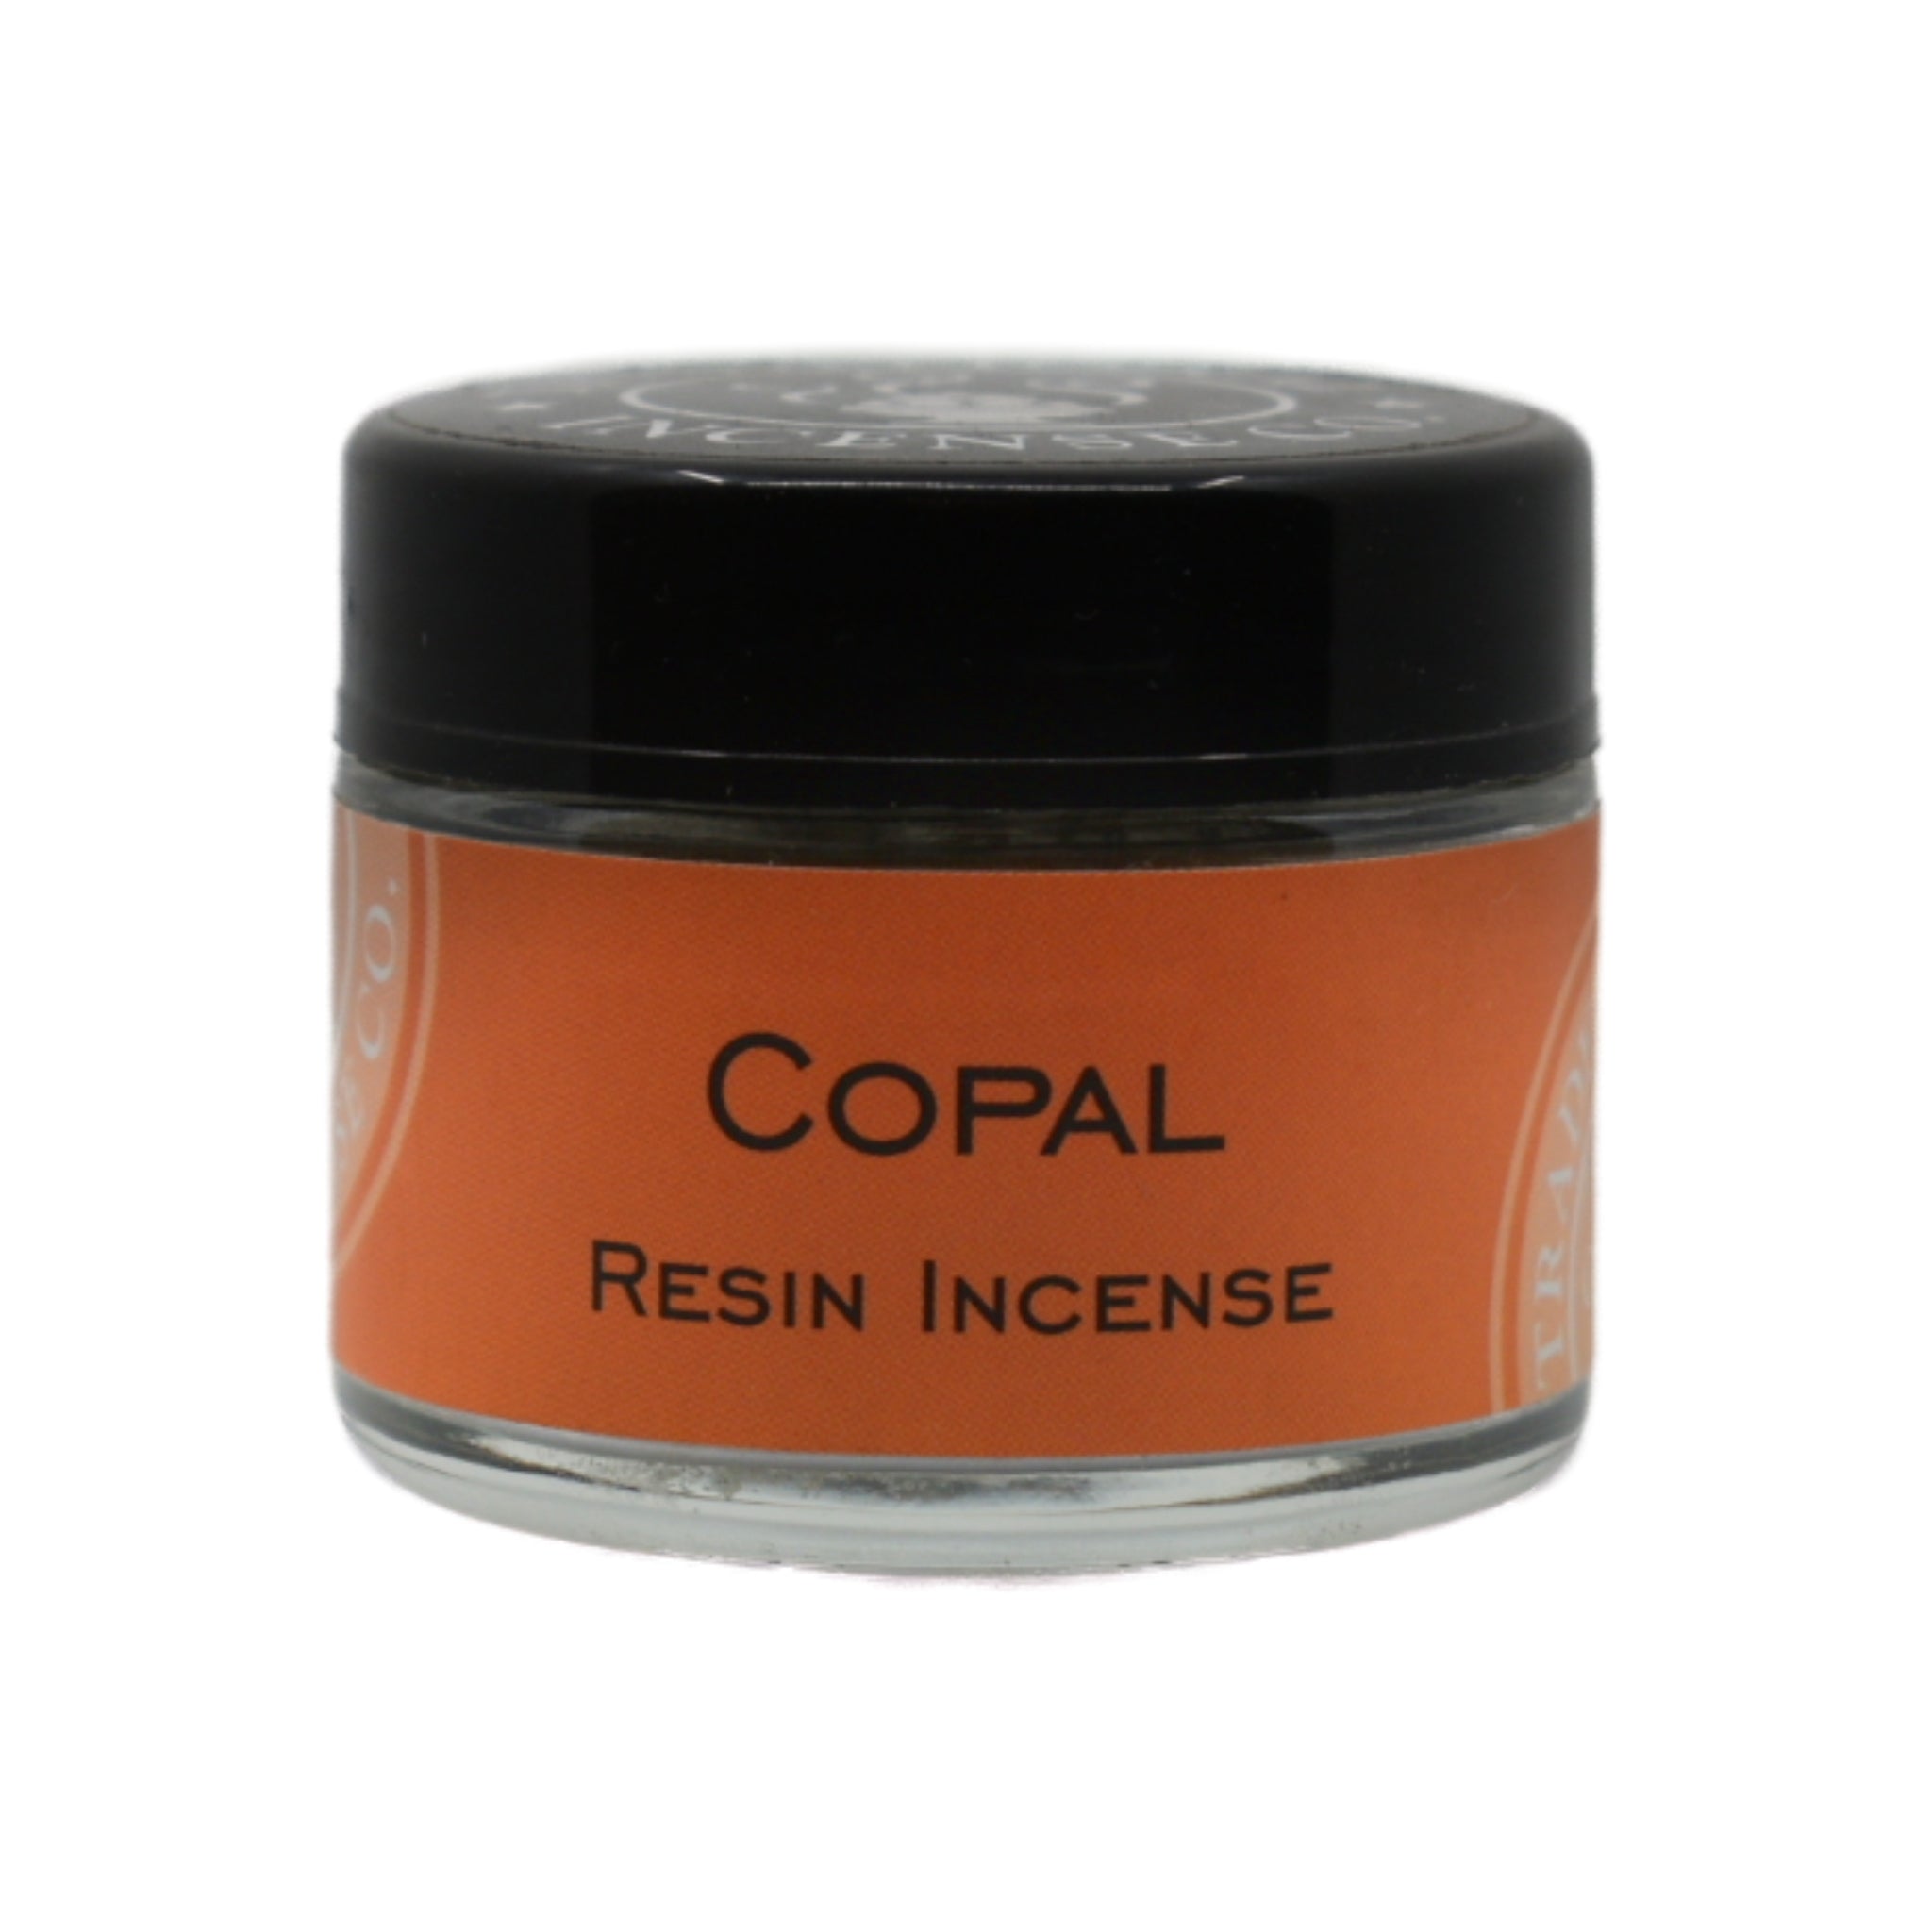 Copal Resin Incense.  Small round container with black top, full of copal resin powder